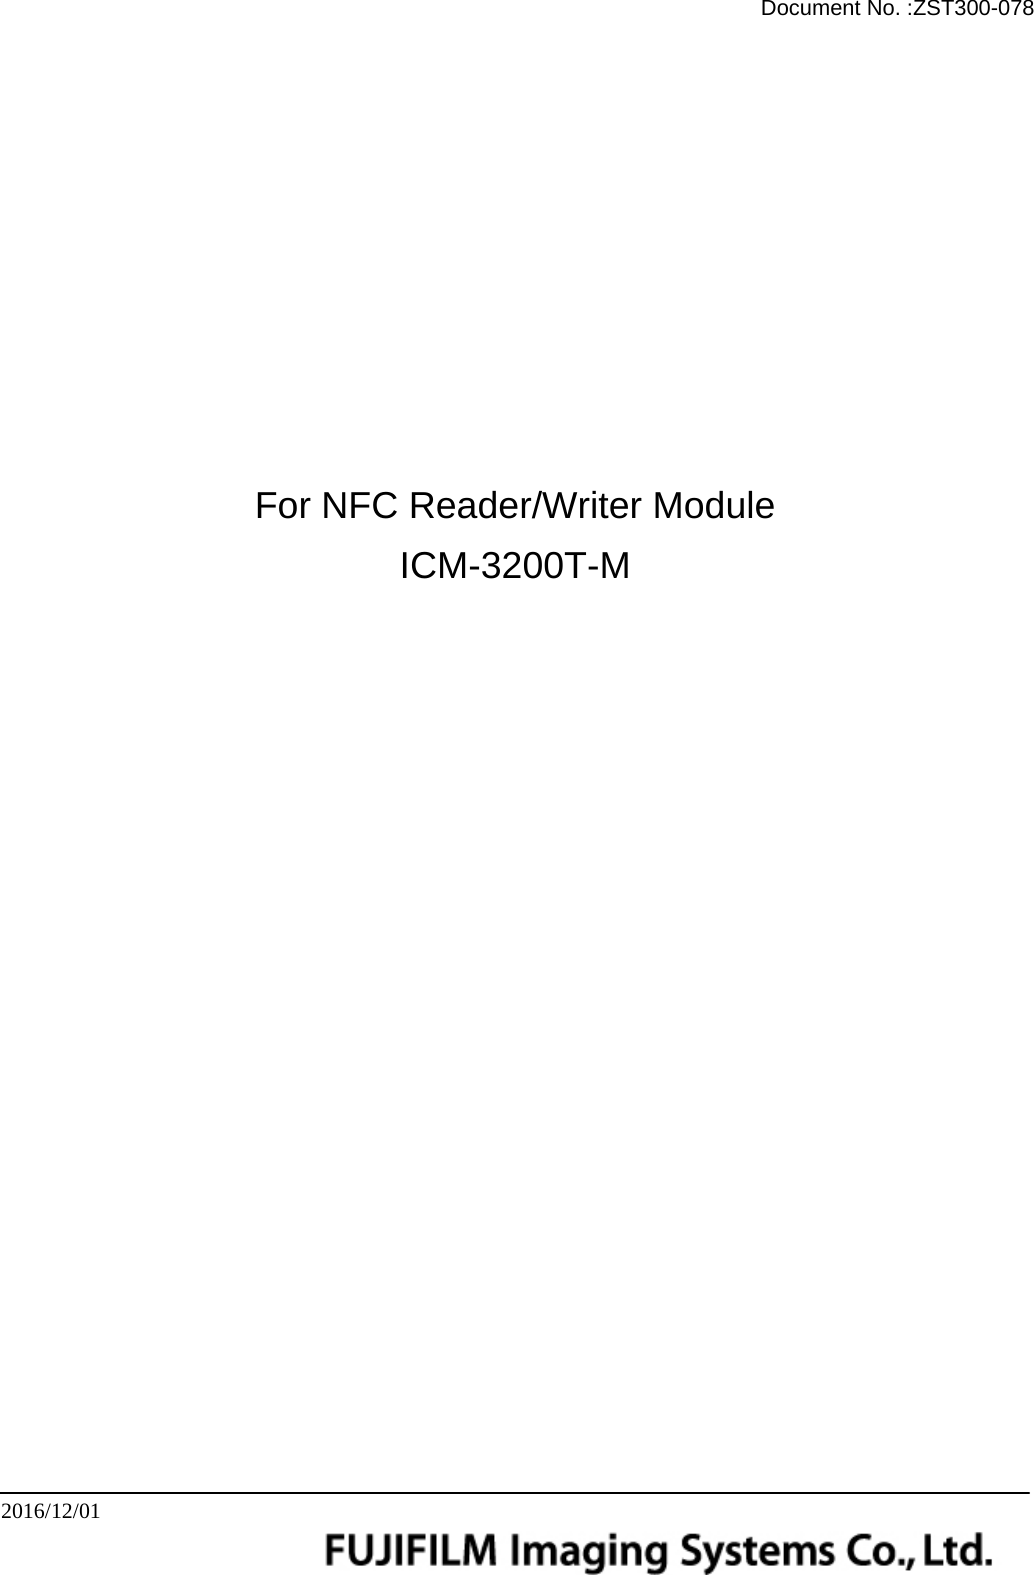  Document No. :ZST300-078 2016/12/01                                                For NFC Reader/Writer Module ICM-3200T-M                       